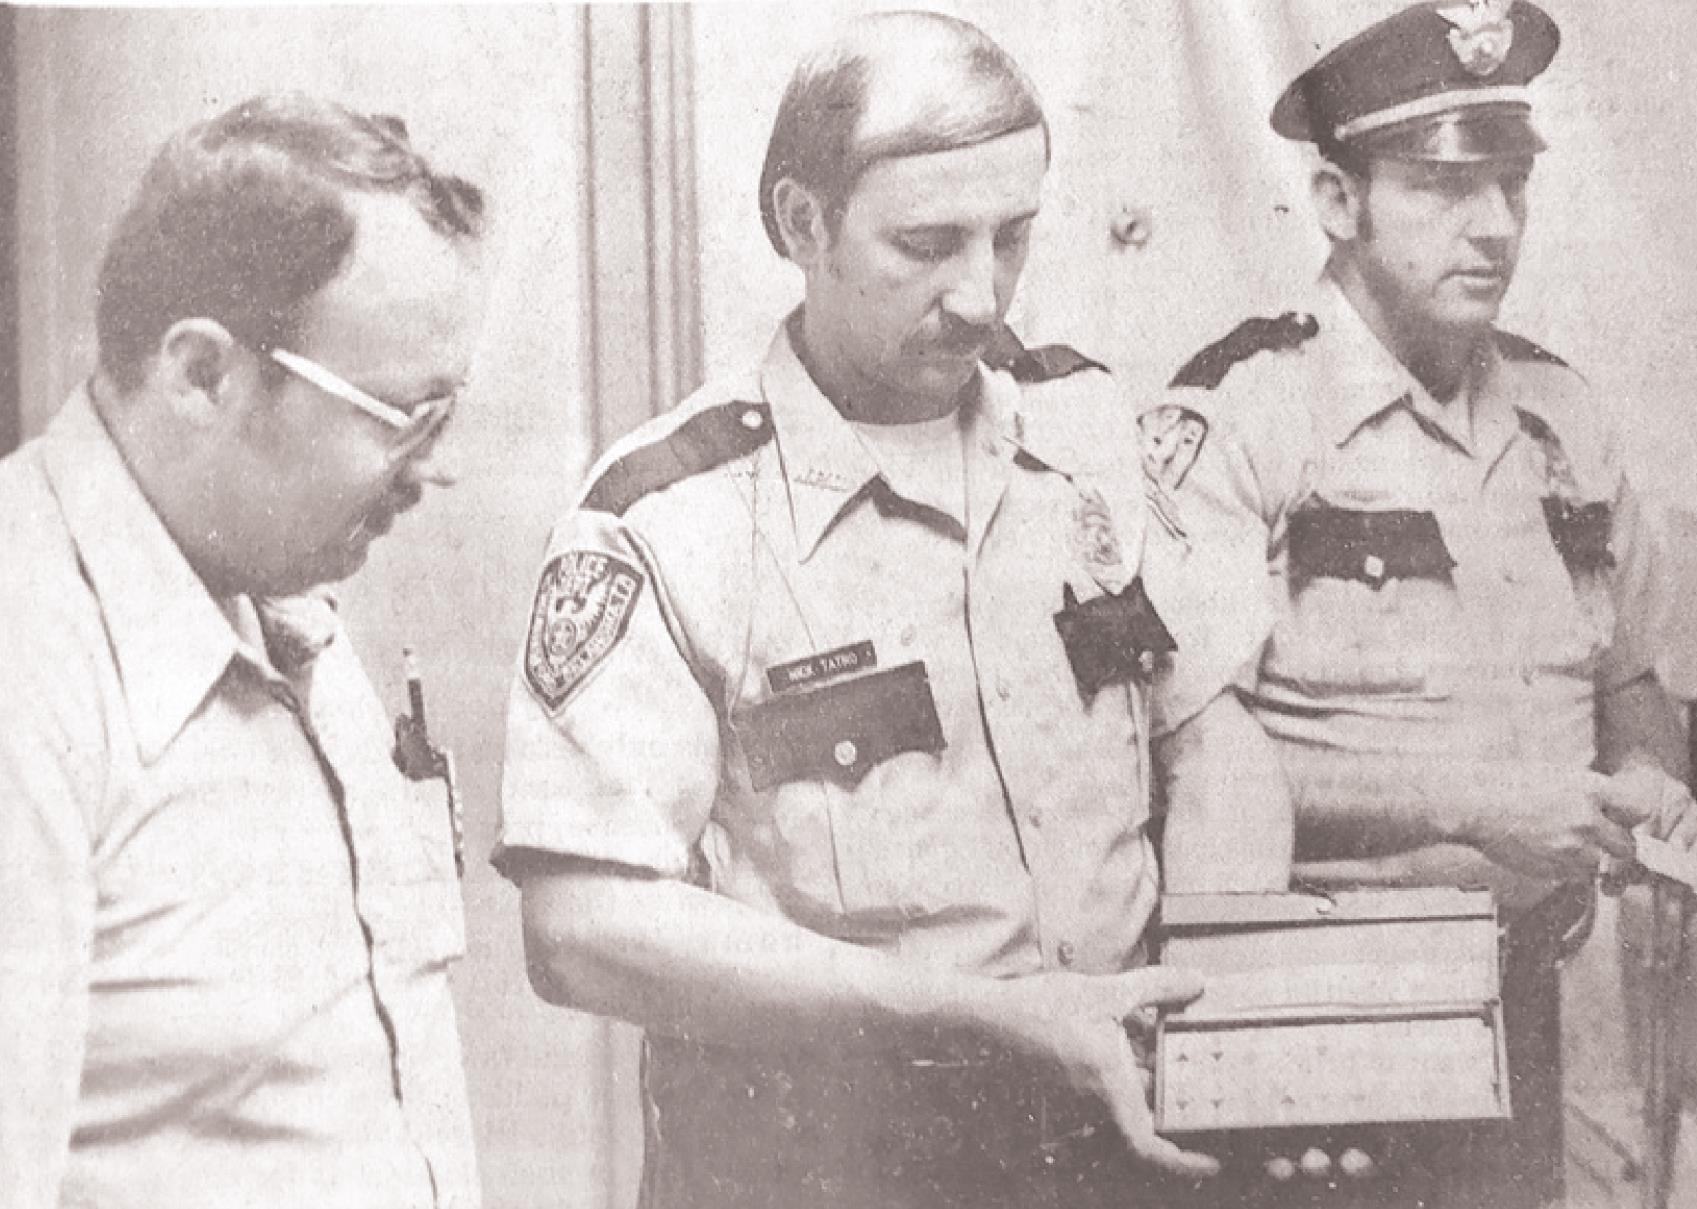 Det. Sgt. Randy Cox, left, and Patrolman Donnie Evans, right, look at some of the evidence from the nearly $25,000 worth of property recovered during an investigation resulting from officer Nick Tatro’s arrest earlier in the week. This picture can be found in the May 18, 1980, edition of the Weatherford Daily News.